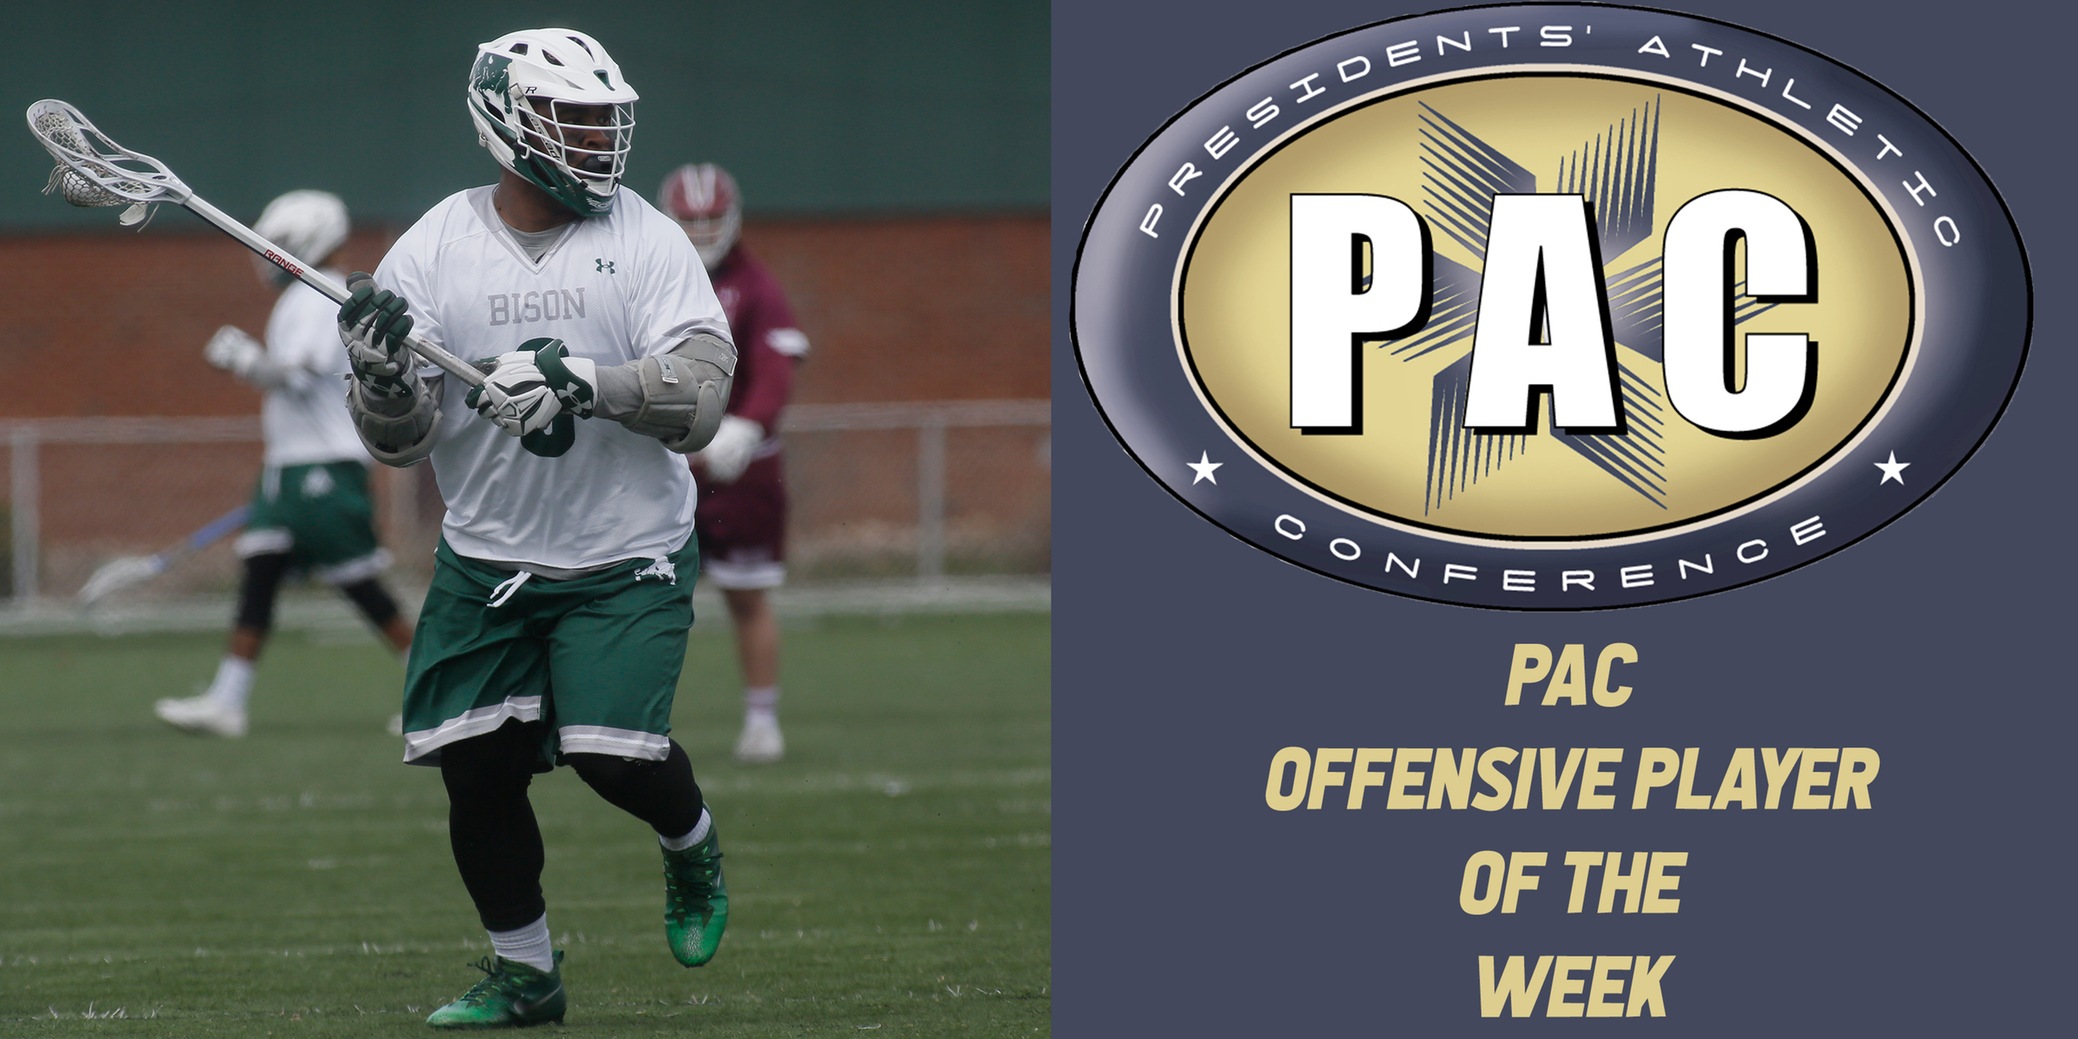 Gatling Earns All-PAC Offensive Player of the Week Honors